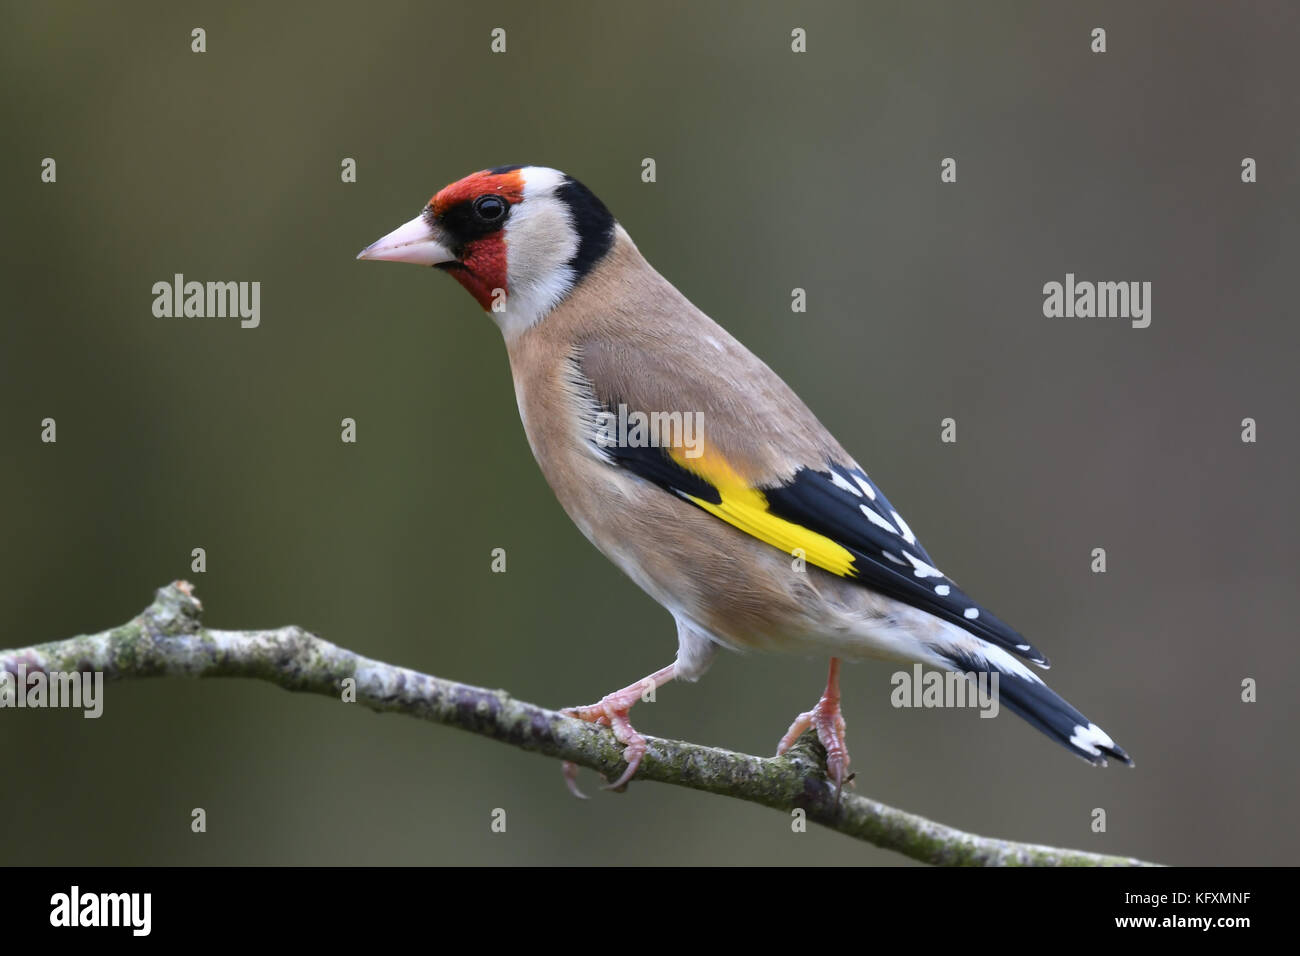 Profile portrait of individual goldfinch (Carduelis carduelis) standing on a garden twig. Devon, UK, March. Stock Photo